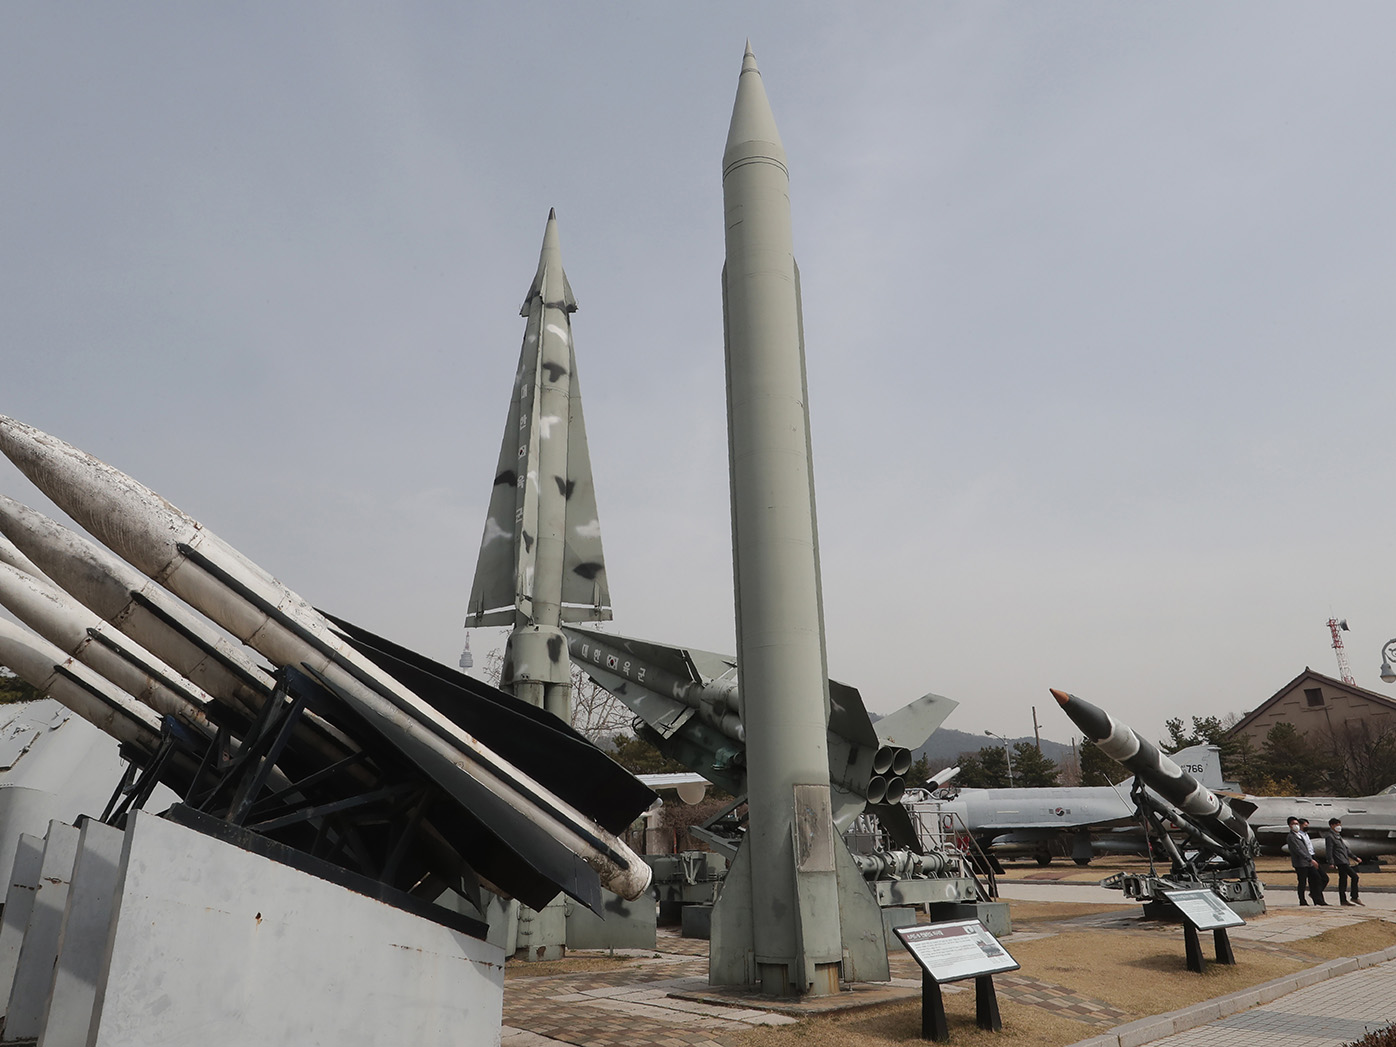 North Korea has conducted its first weapons test since the Biden administration was sworn in.